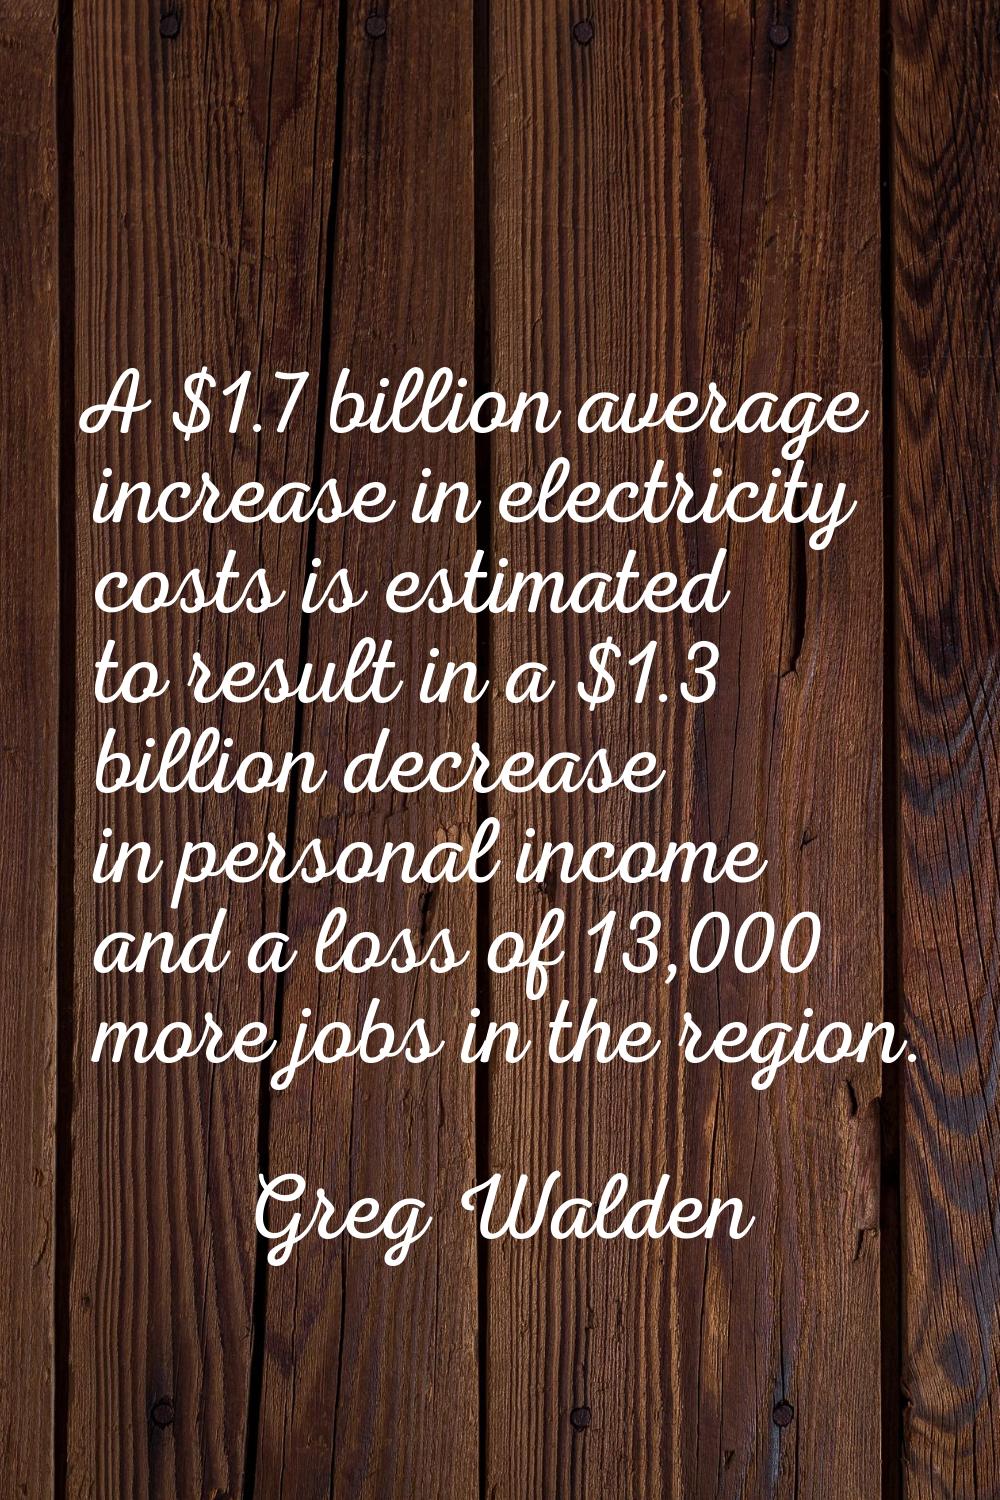 A $1.7 billion average increase in electricity costs is estimated to result in a $1.3 billion decre